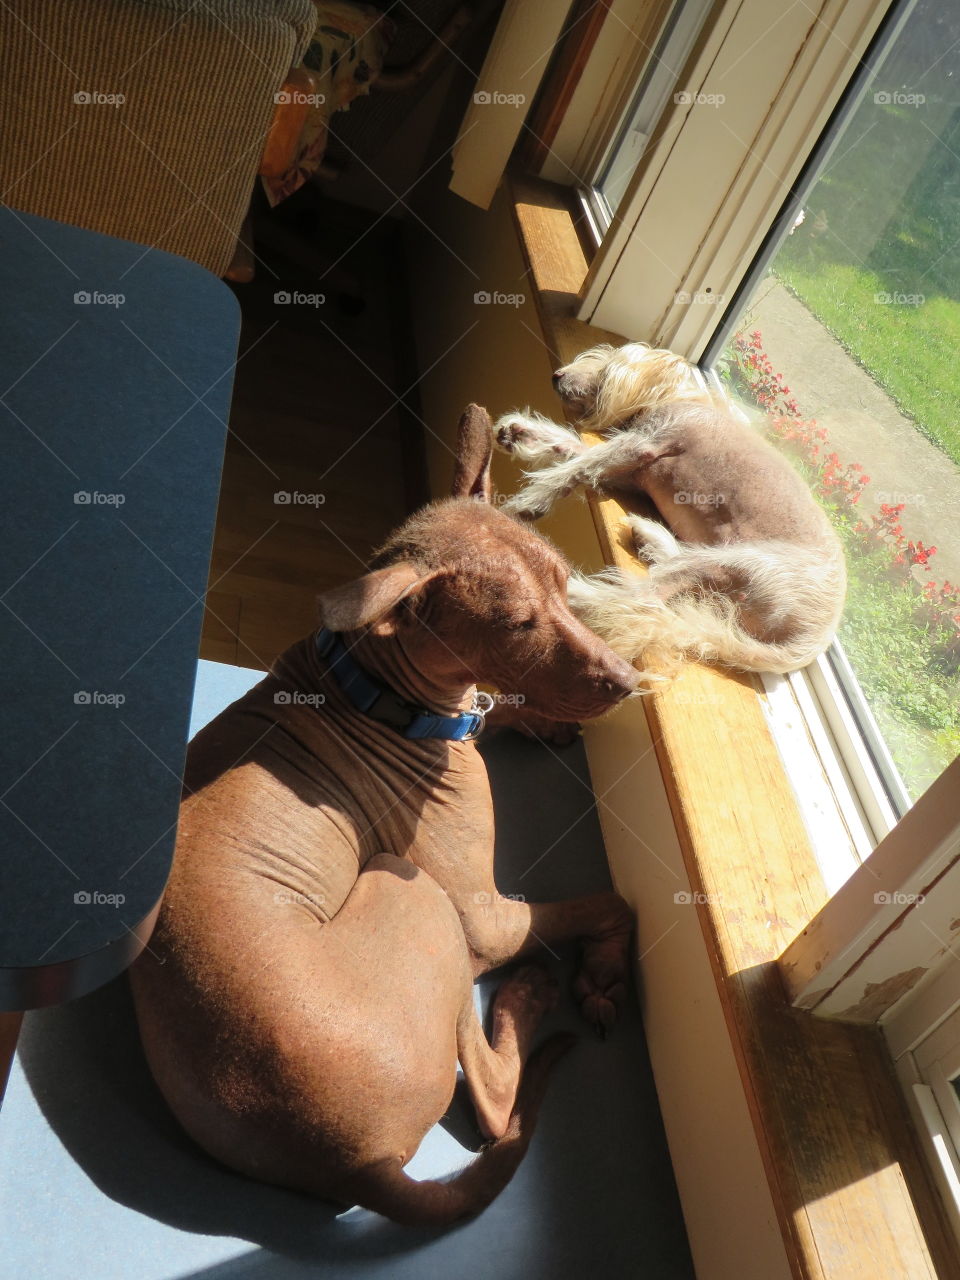 Sunny window for the dogs